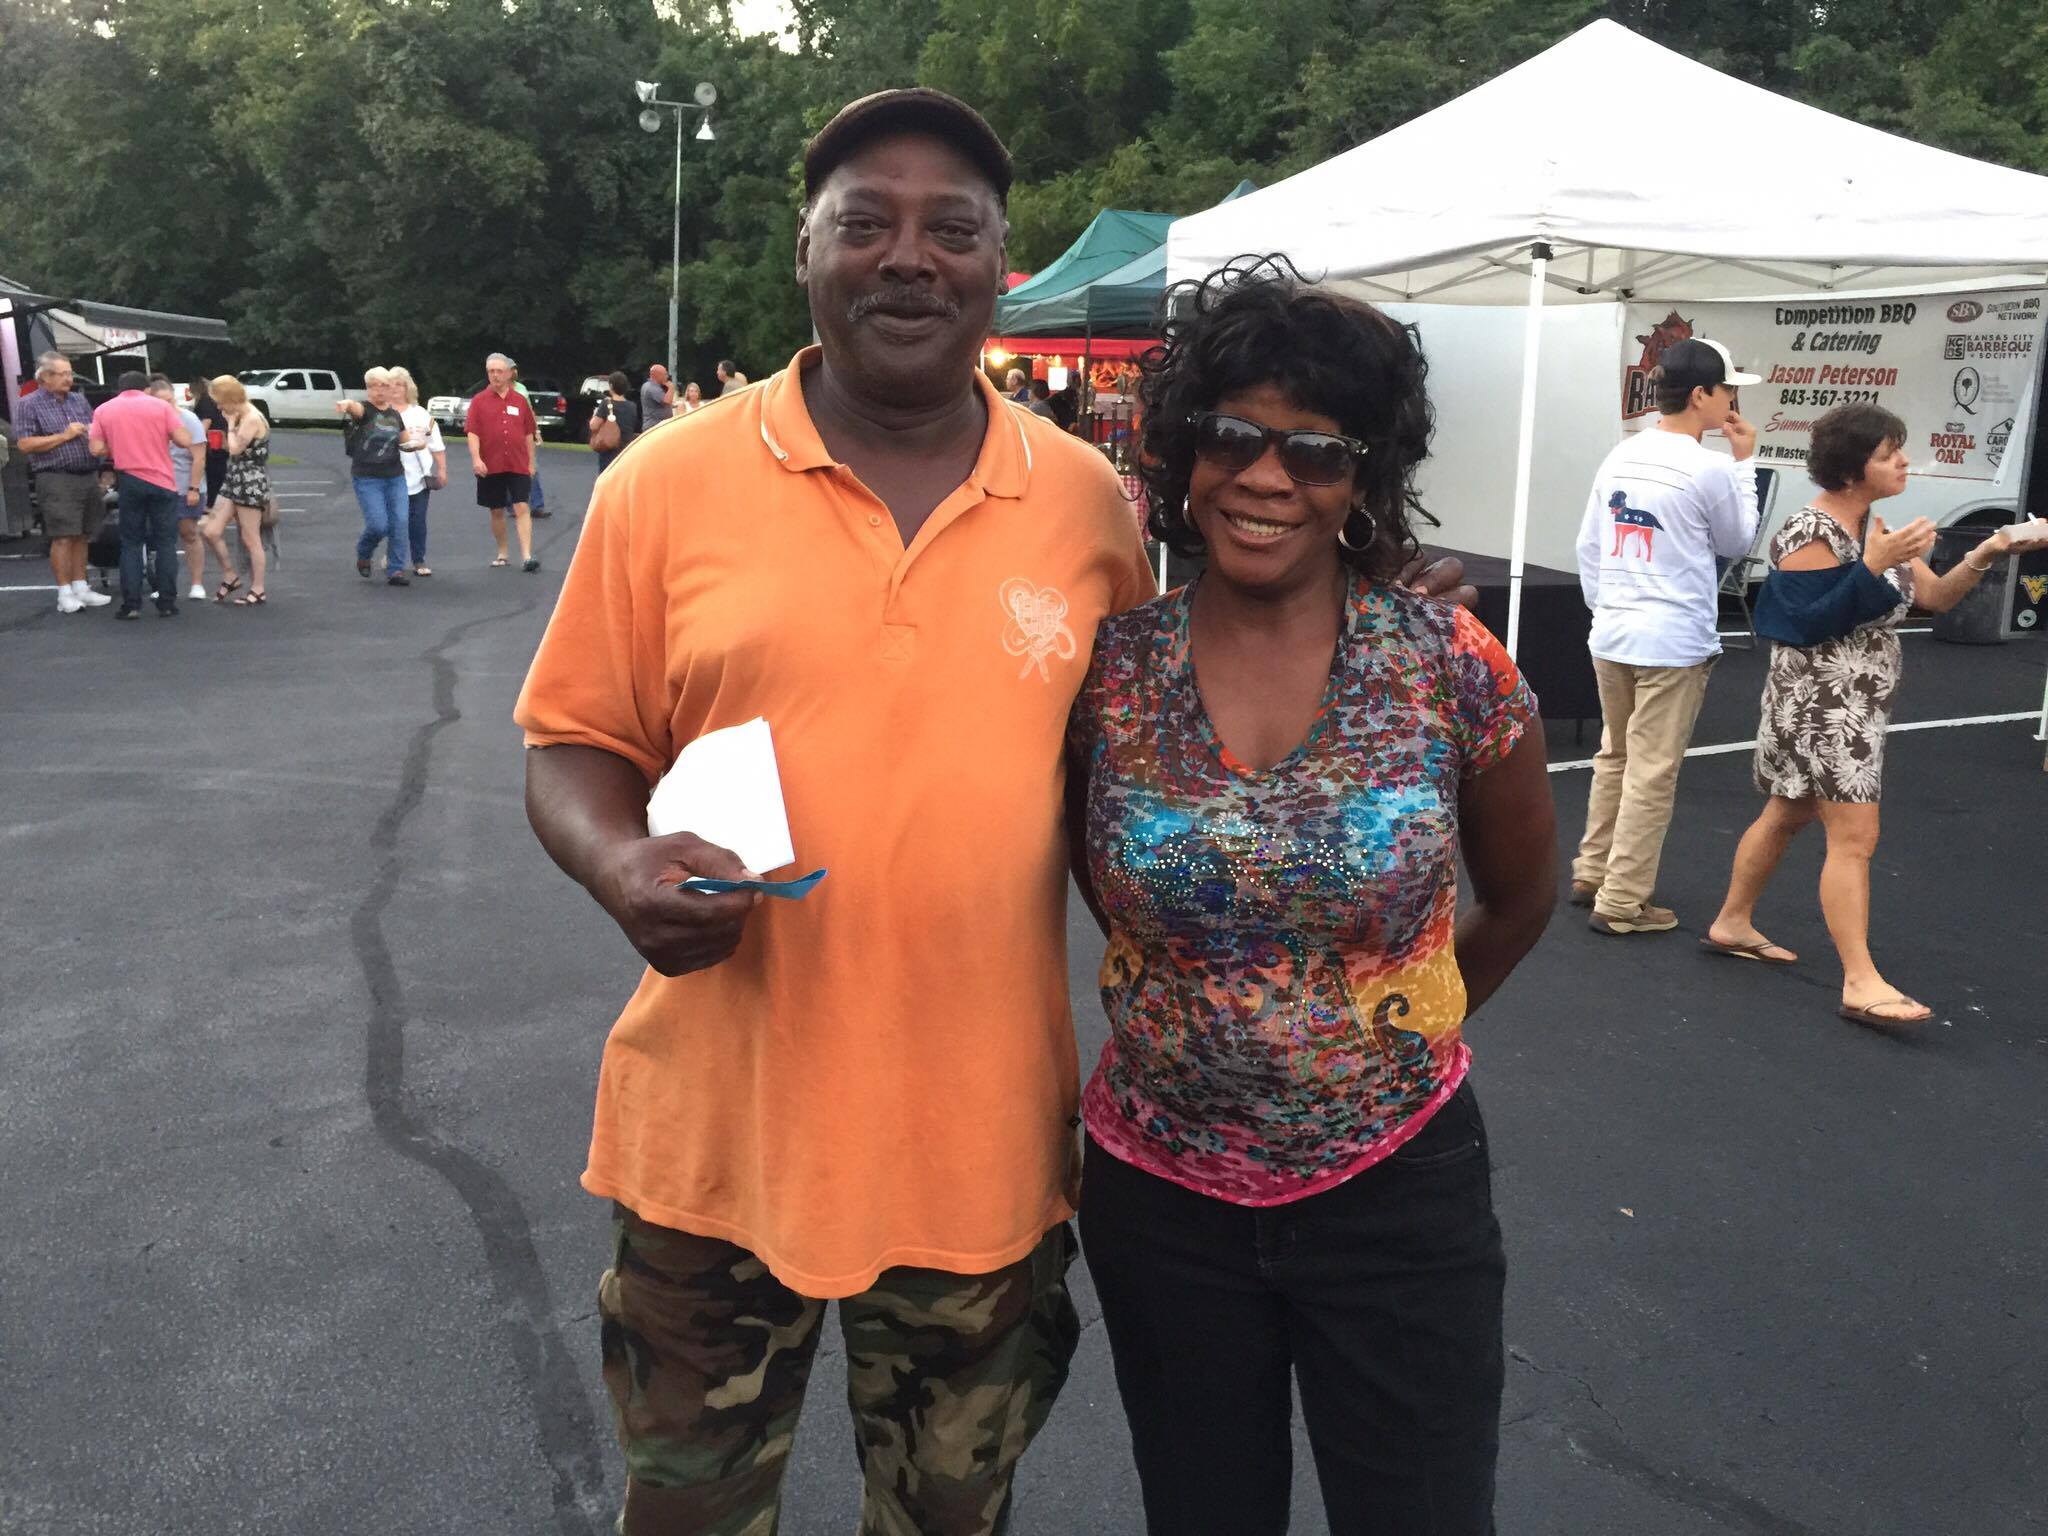 Johns Rivers and Dee Reid, both of Moncks Corner, came to the cook off after seeing signs posted around town.